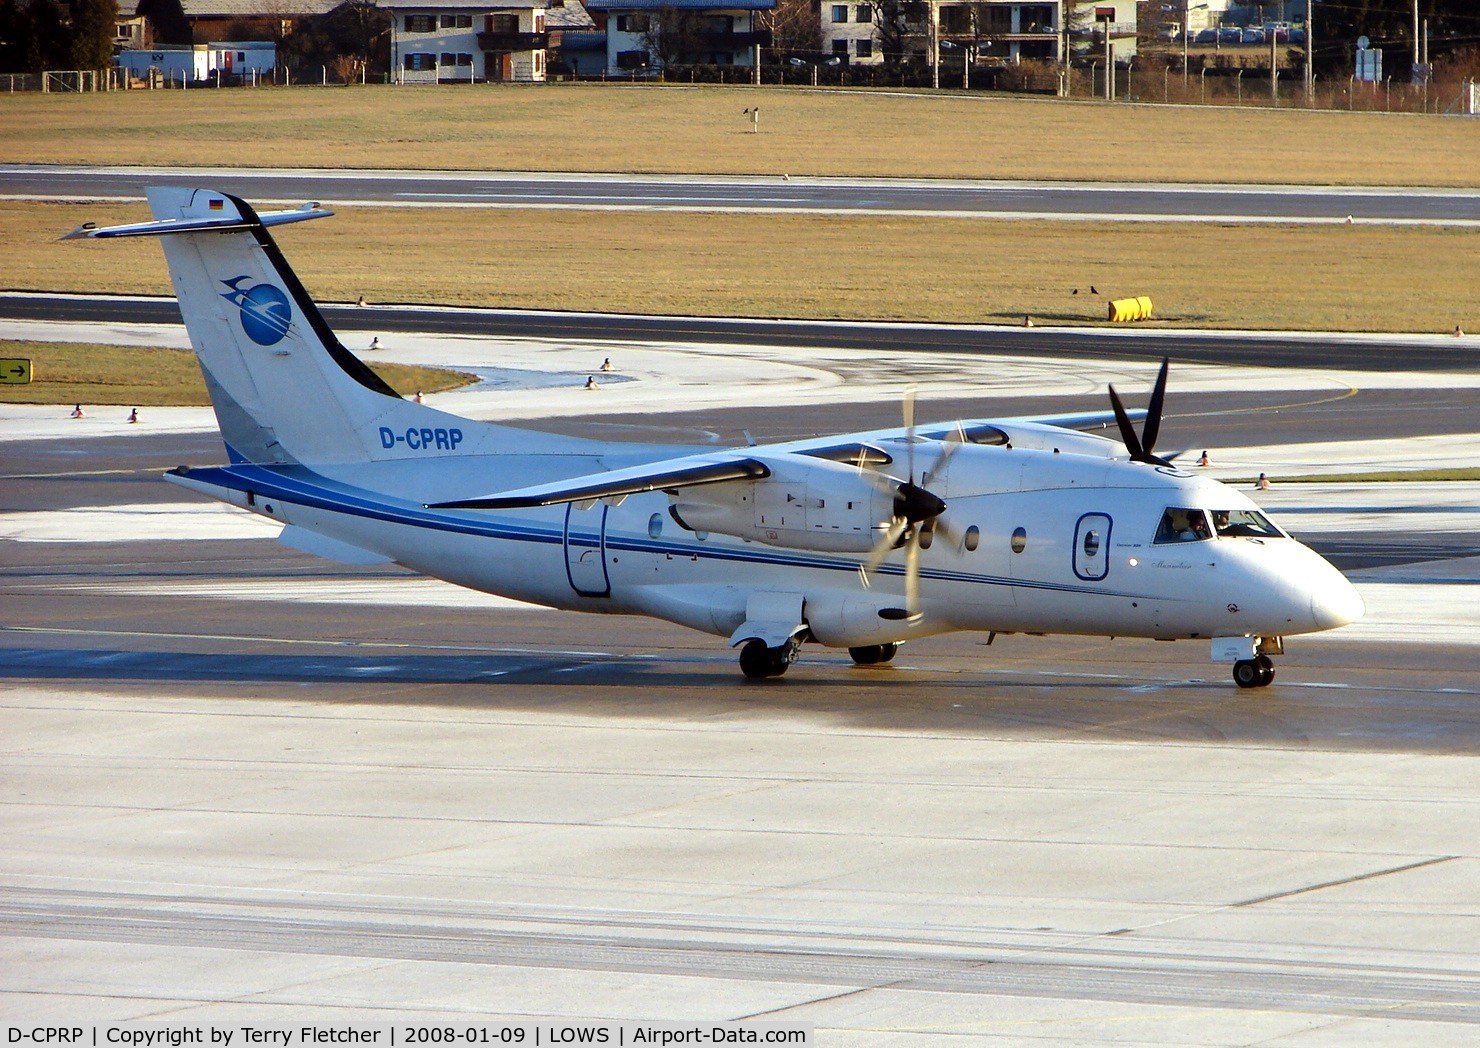 D-CPRP, 1996 Dornier 328-110 C/N 3066, Currently operates on the Salzburg to Zurich route operated by Cirrus Airlines